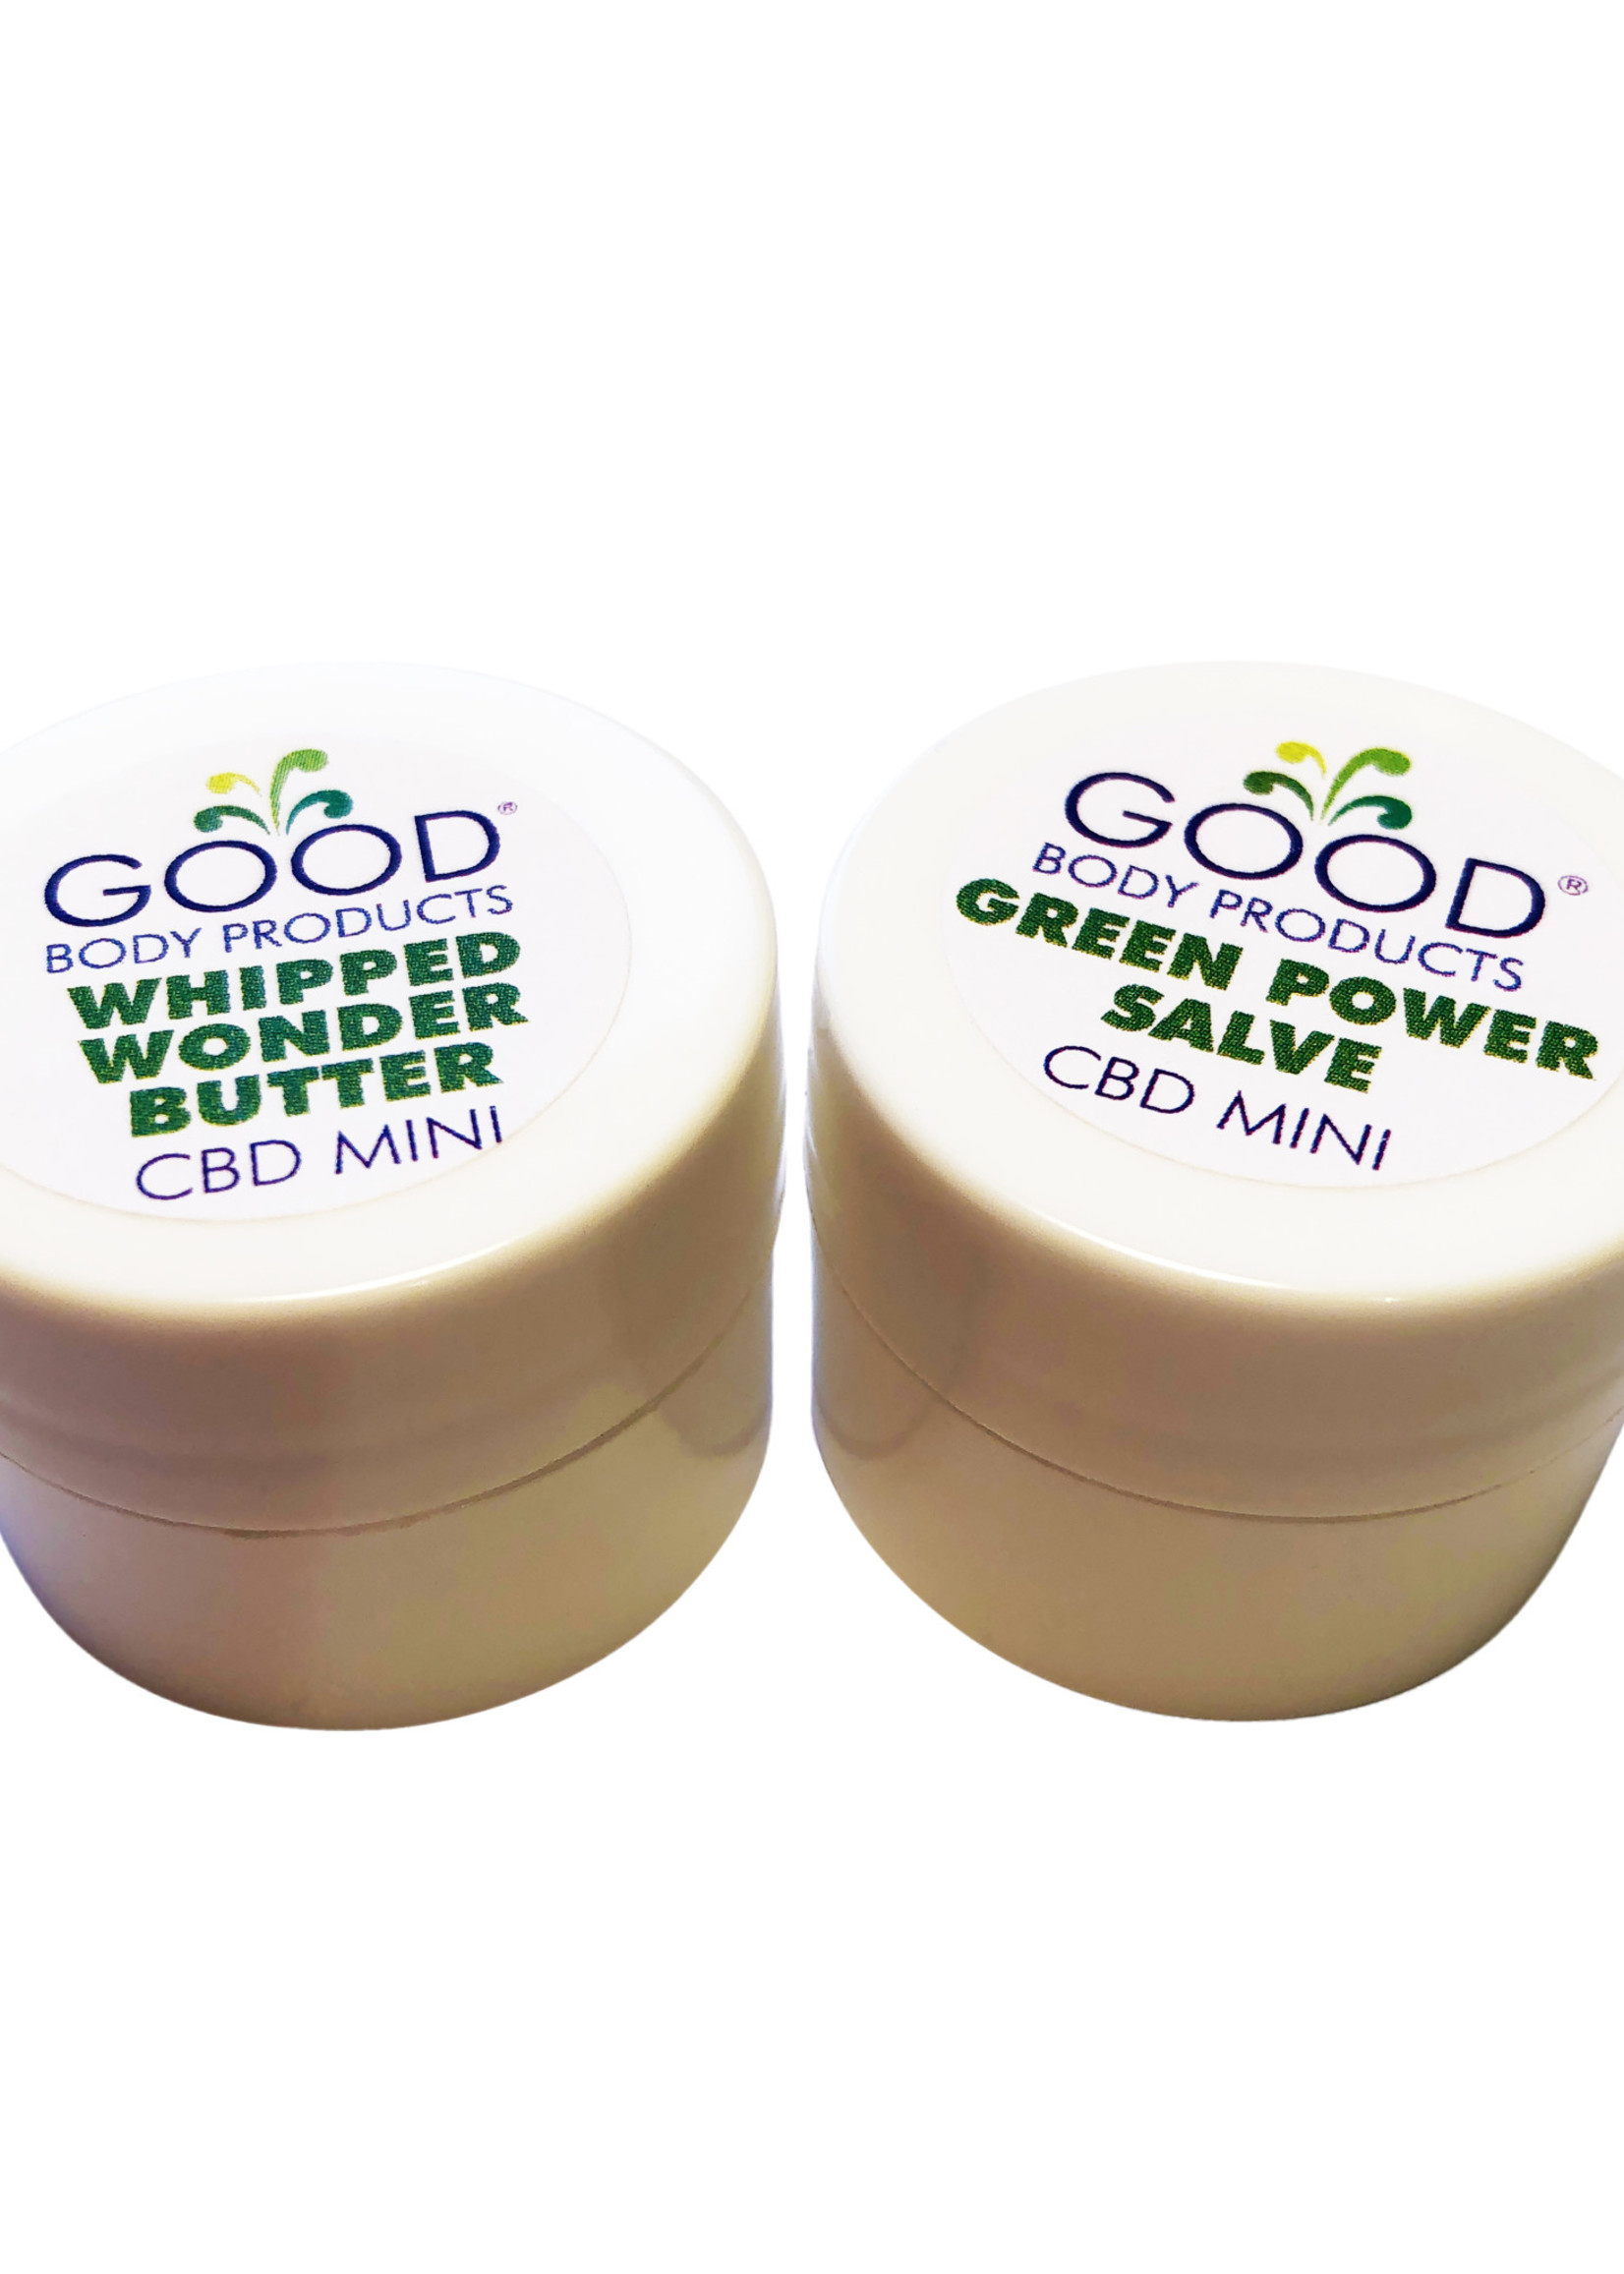 Good Body Products GBP, CBD Minis, Green Power Salve and Whipped Wonder Butter, 2 x .25oz